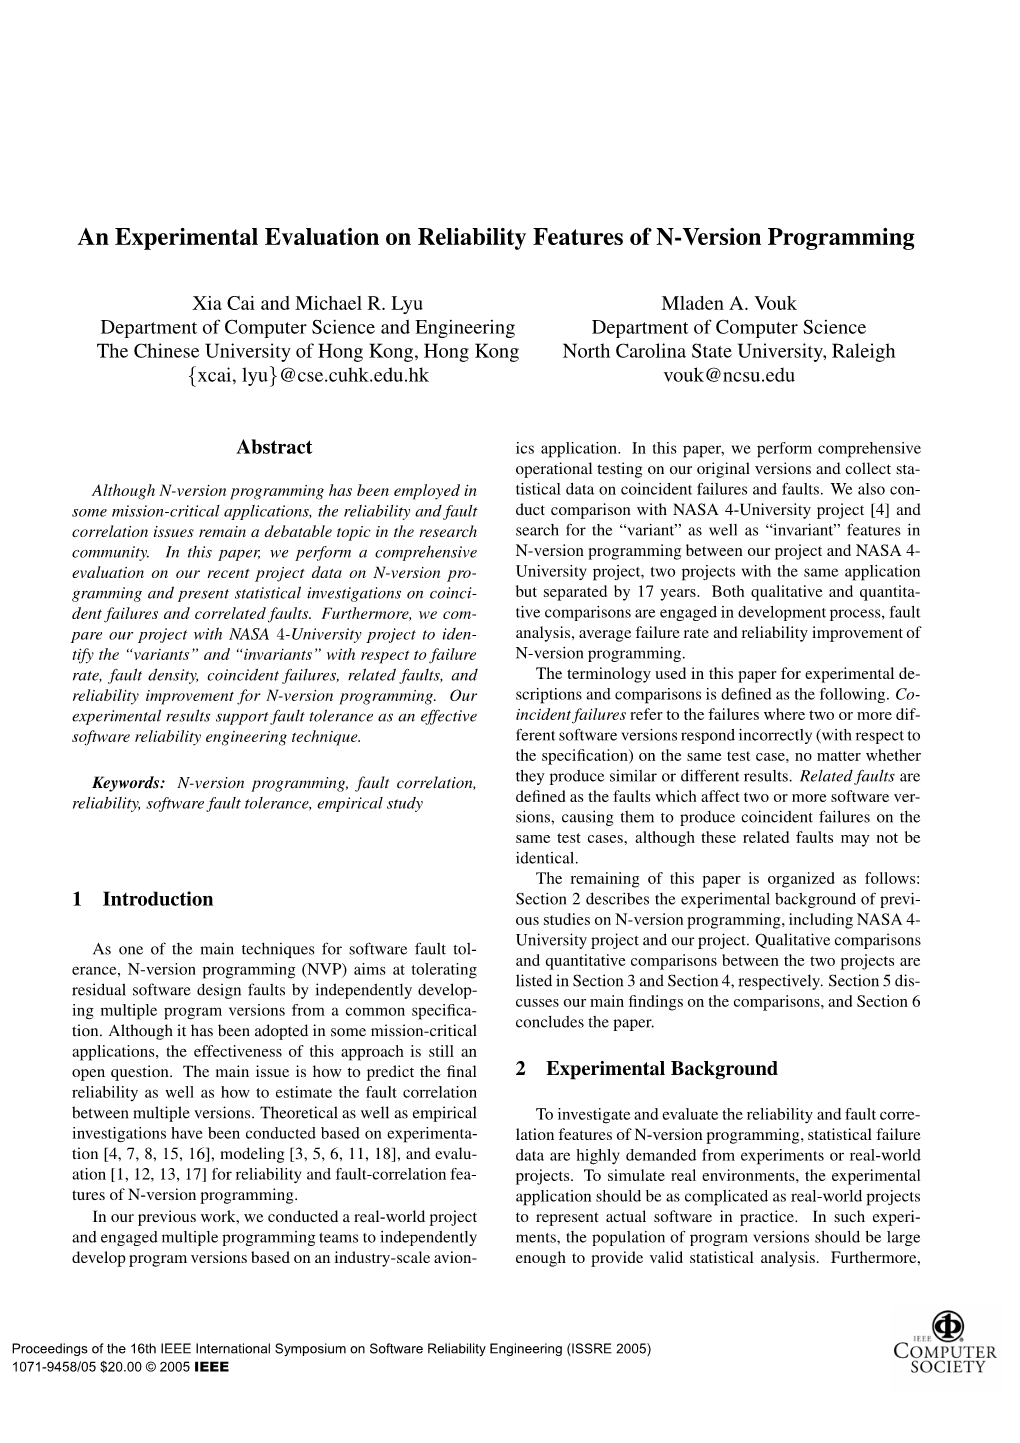 An Experimental Evaluation on Reliability Features of N-Version Programming